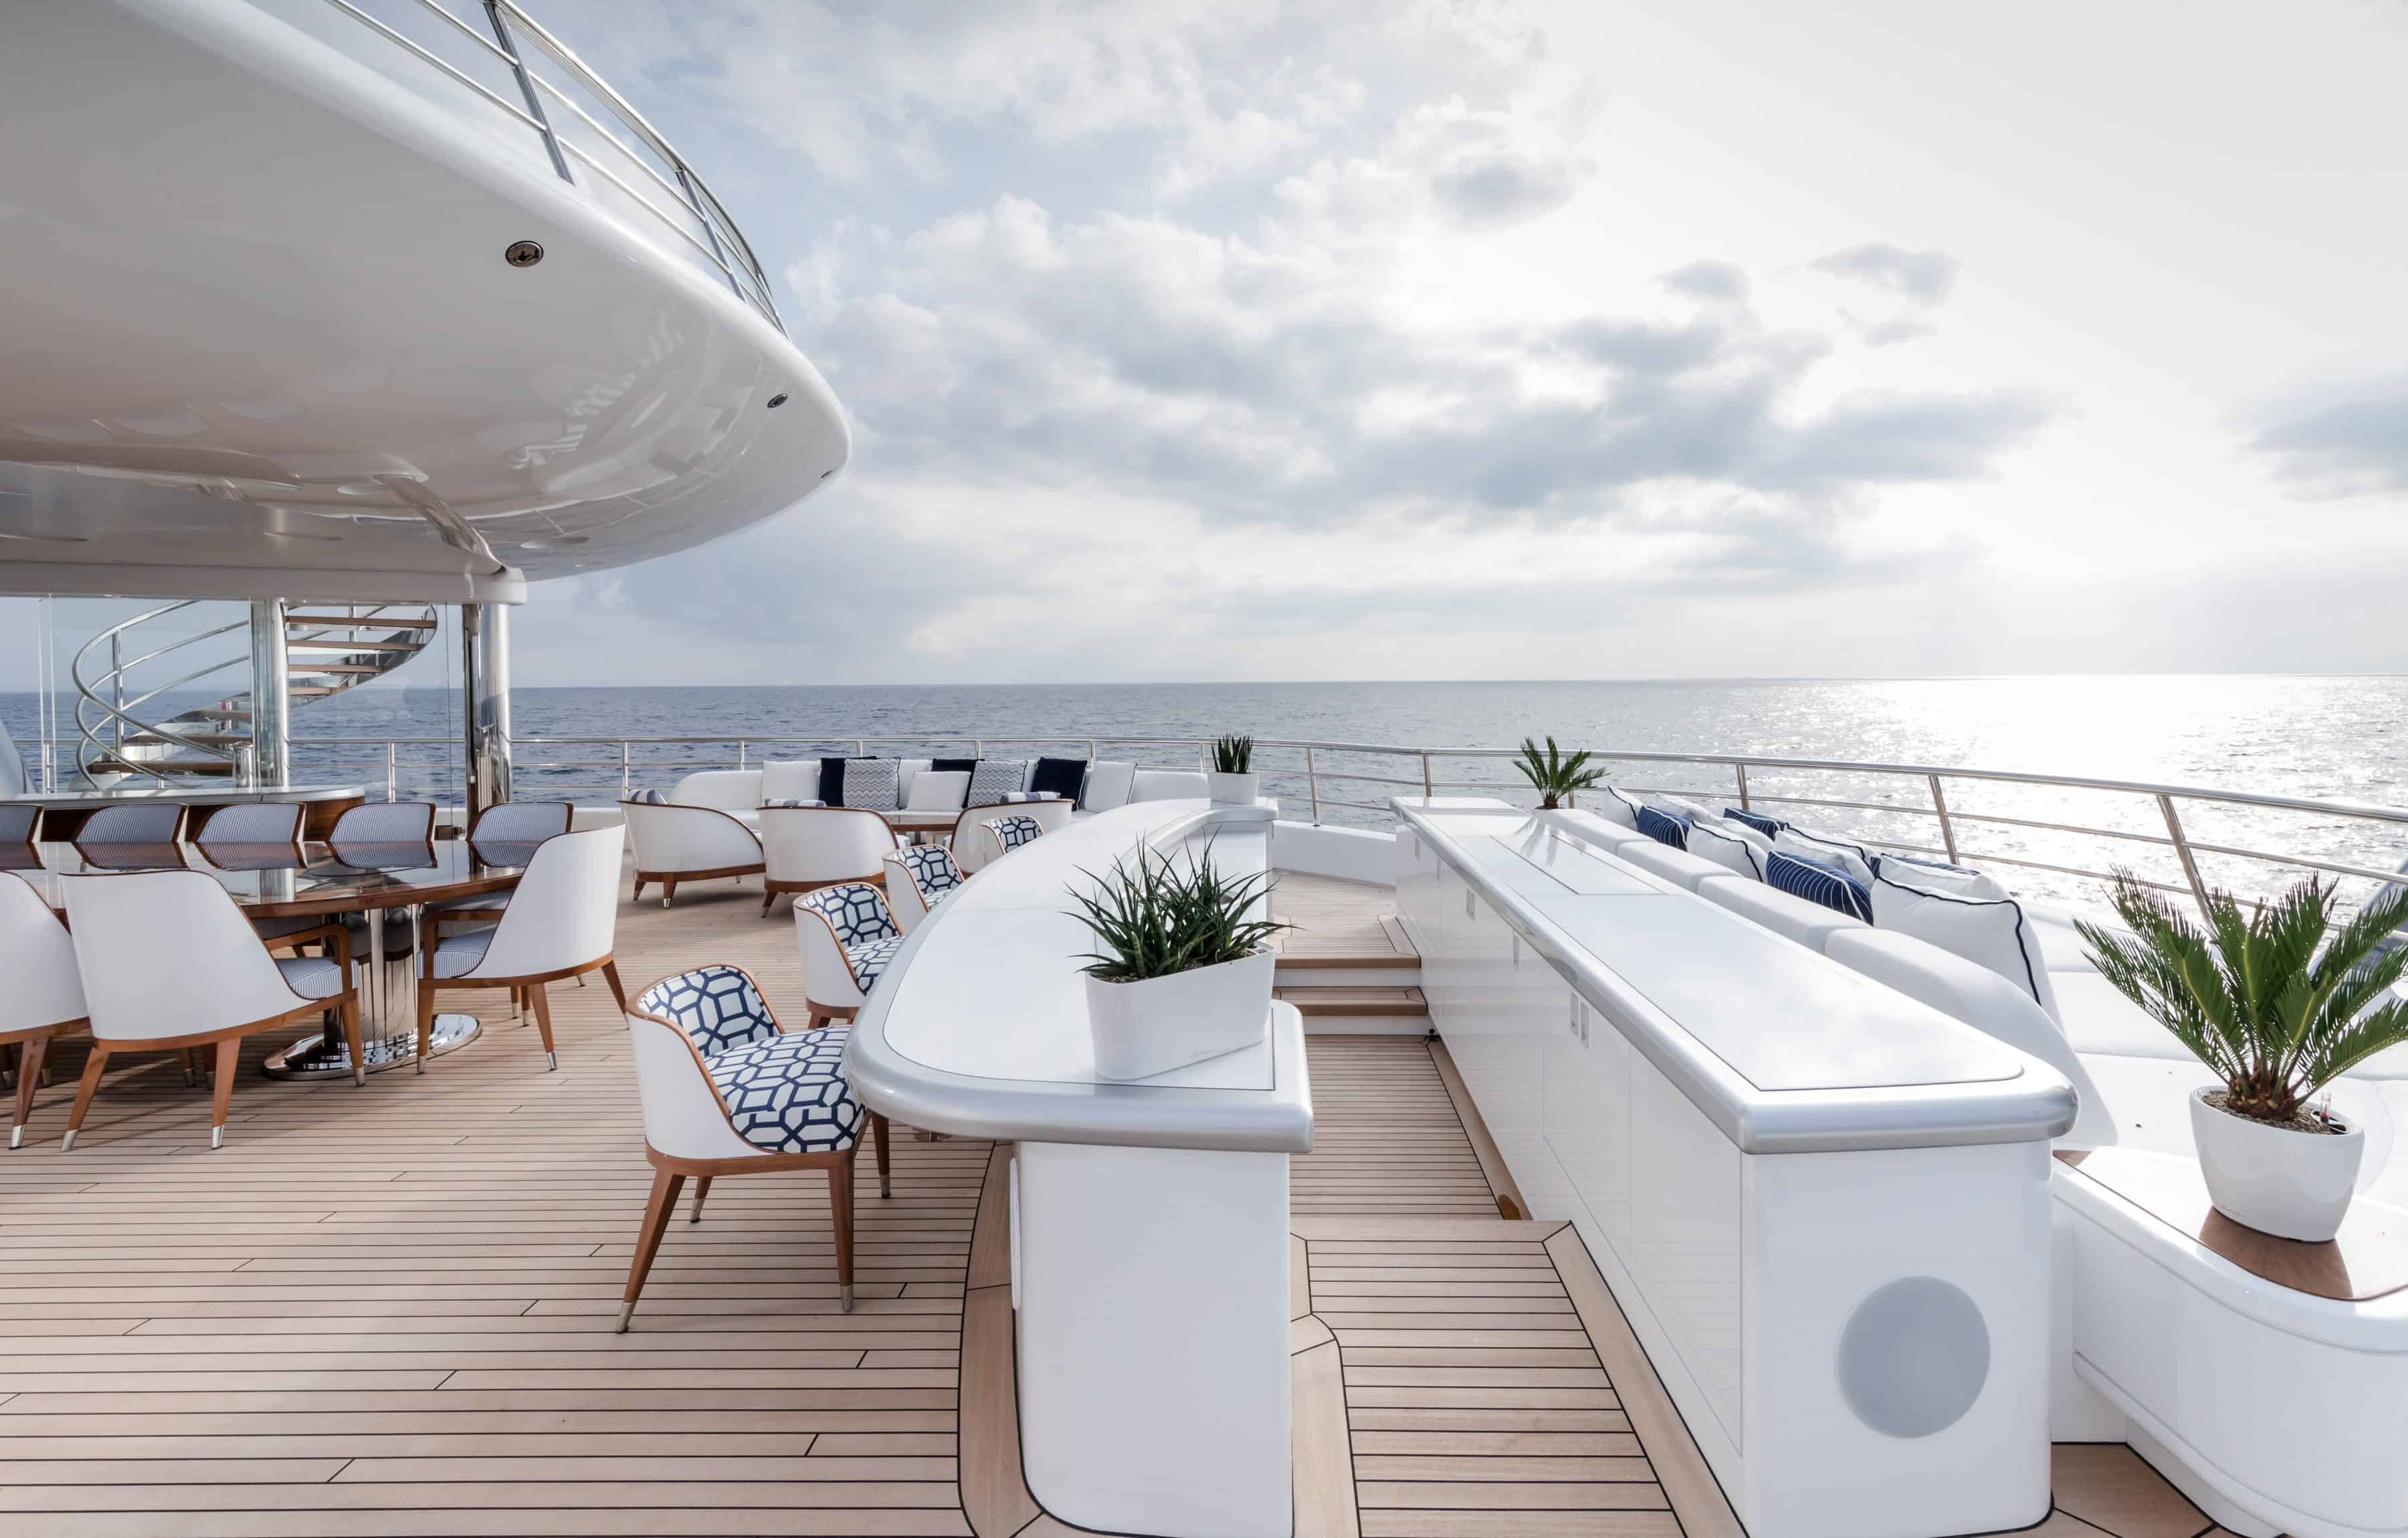 The successor of Abeking & Rasmussen's motor yacht Excellence in detail ...